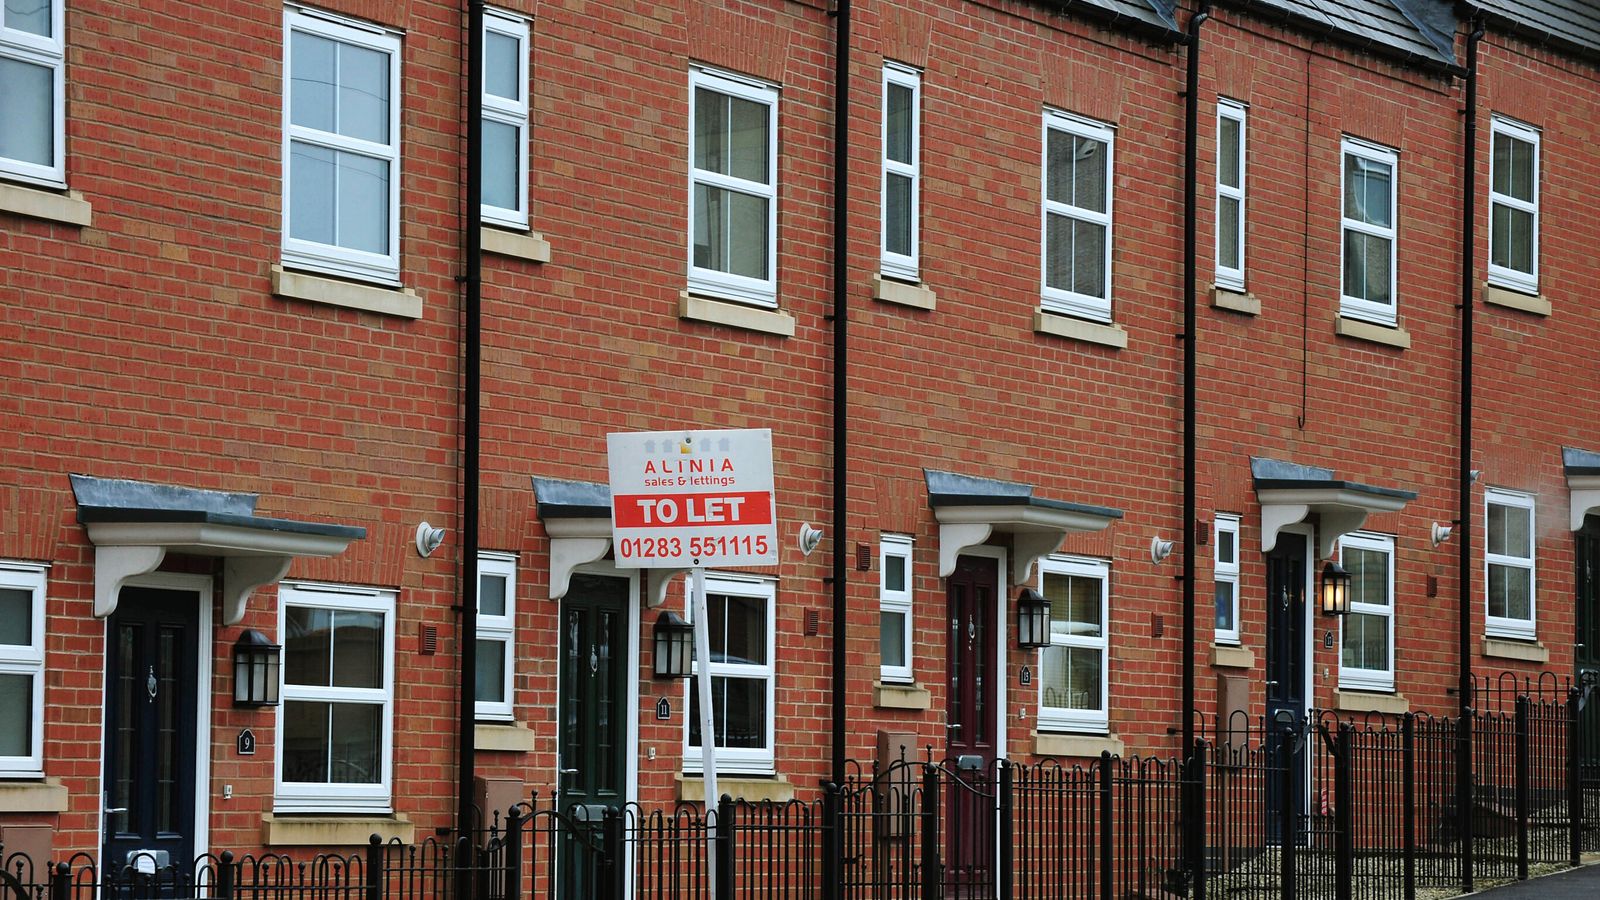 House prices forecast to stall next year - but no relief for renters